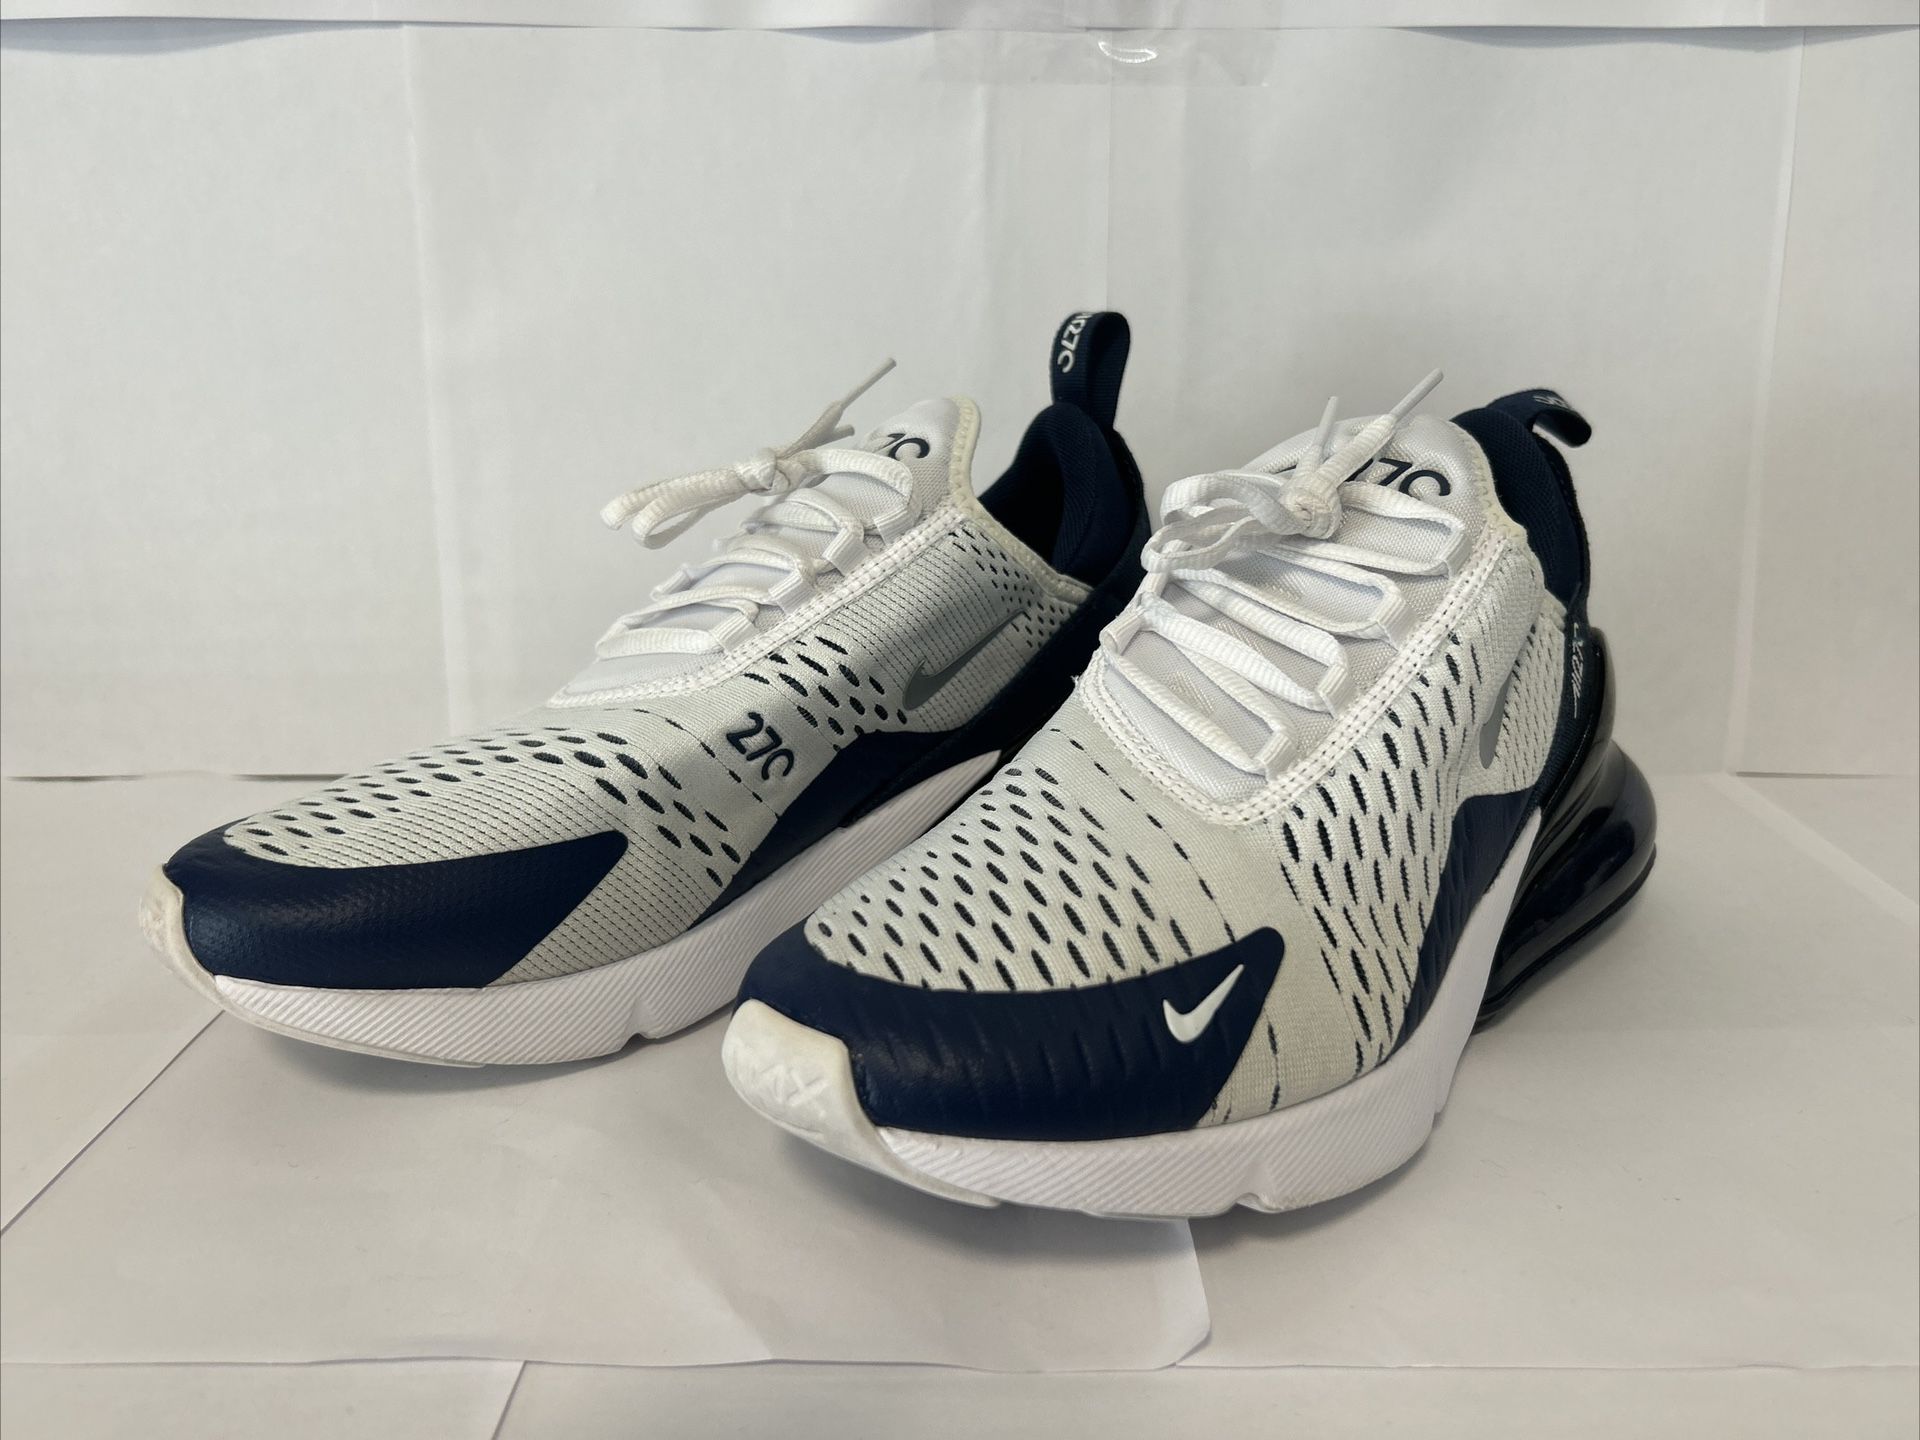 Size 8 USED 9/10 Men's Nike Air Max 270 Midnight Navy DH0613-100 for Sale in Arlington, TX - OfferUp